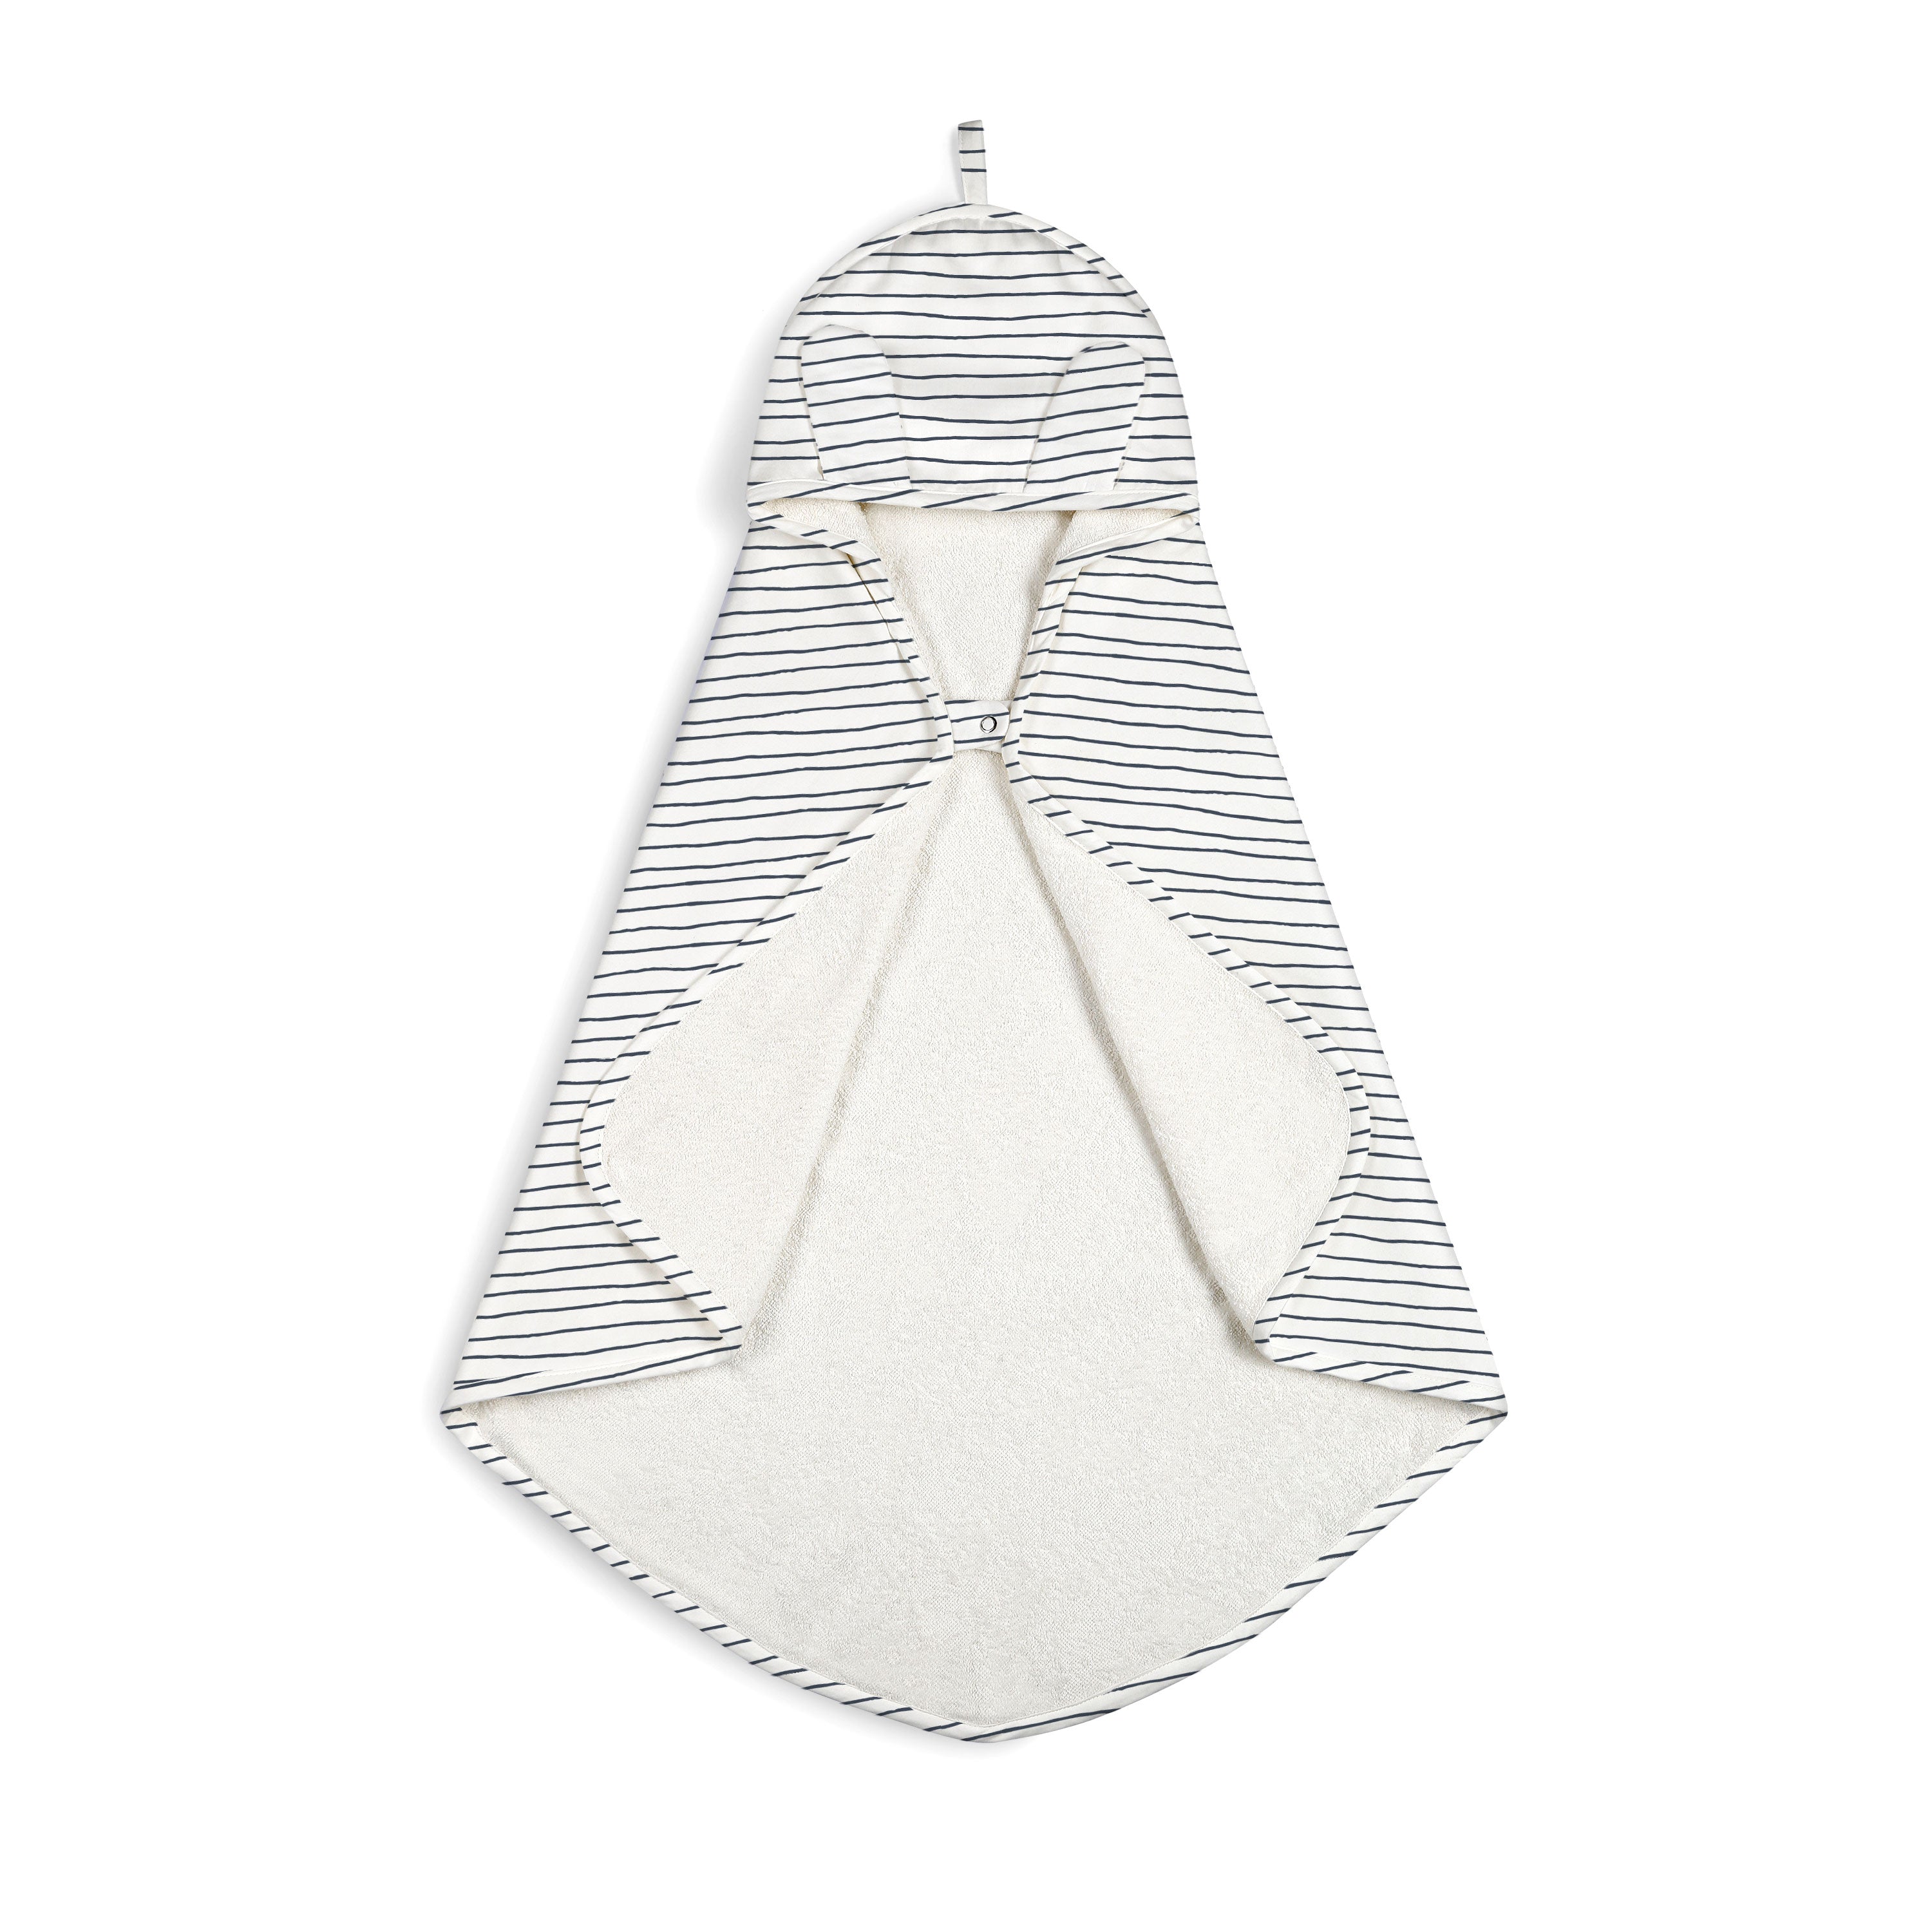 A Makemake Organics striped baby sleep sack with a zipper and a simple closure at the top, displayed against a white background.